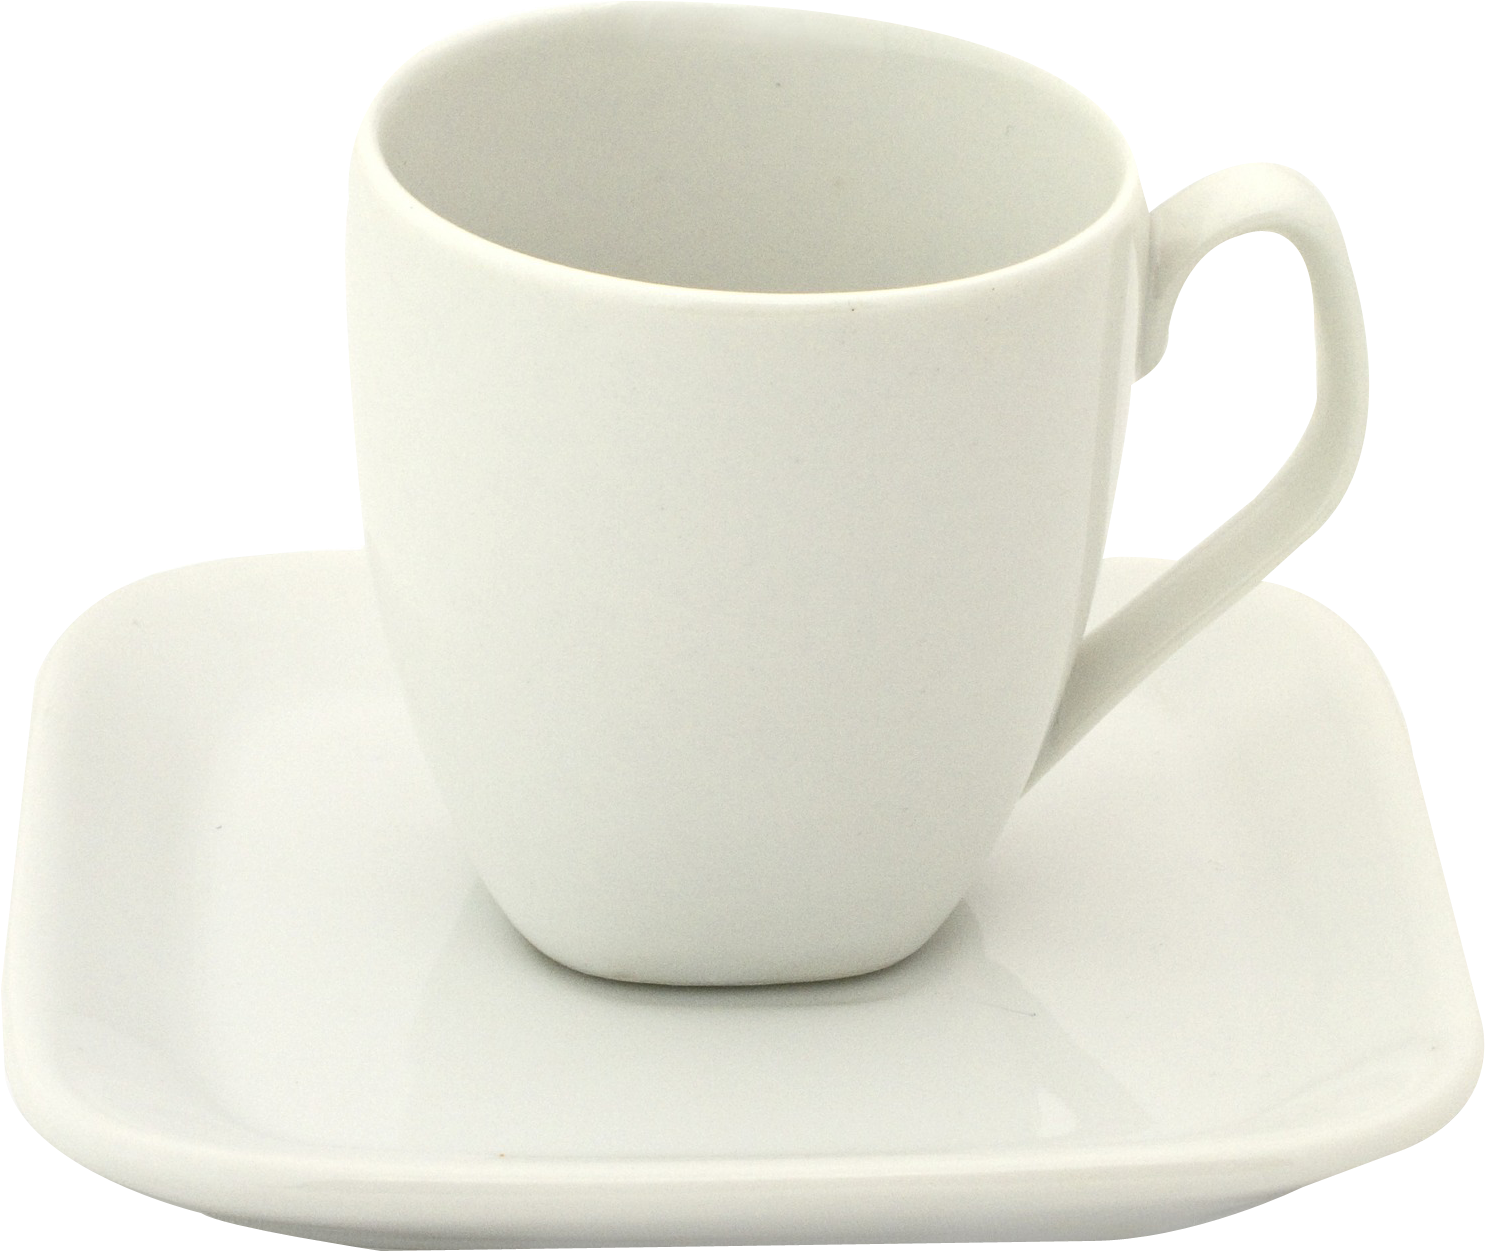 A White Cup And Saucer